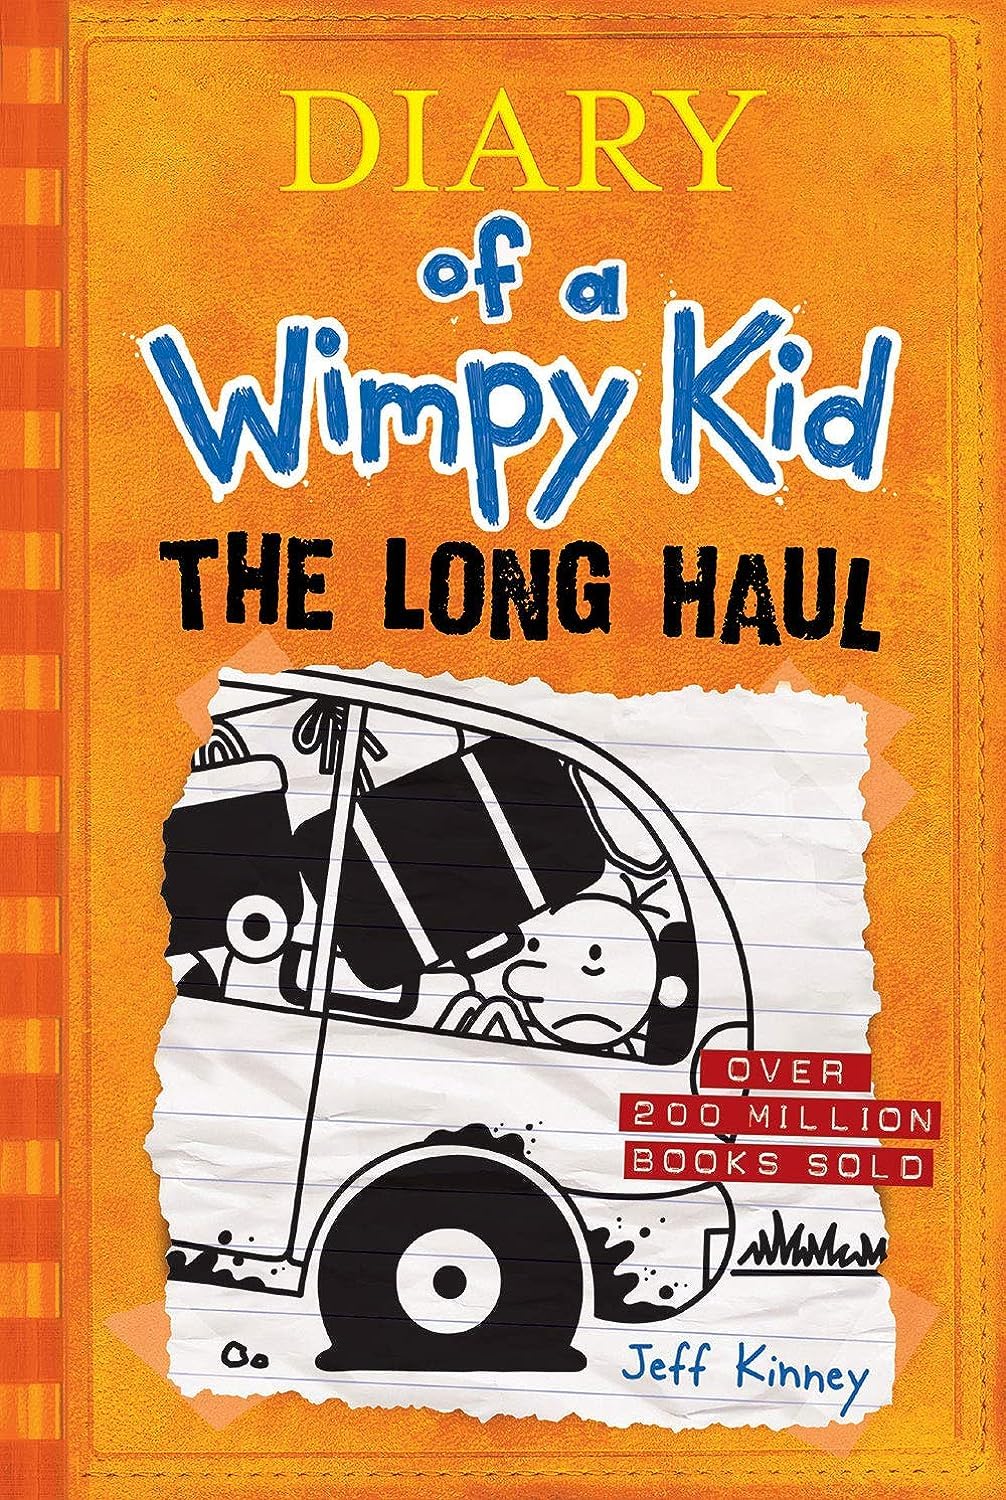 The Diary Of A Wimpy Kid: The Long Haul